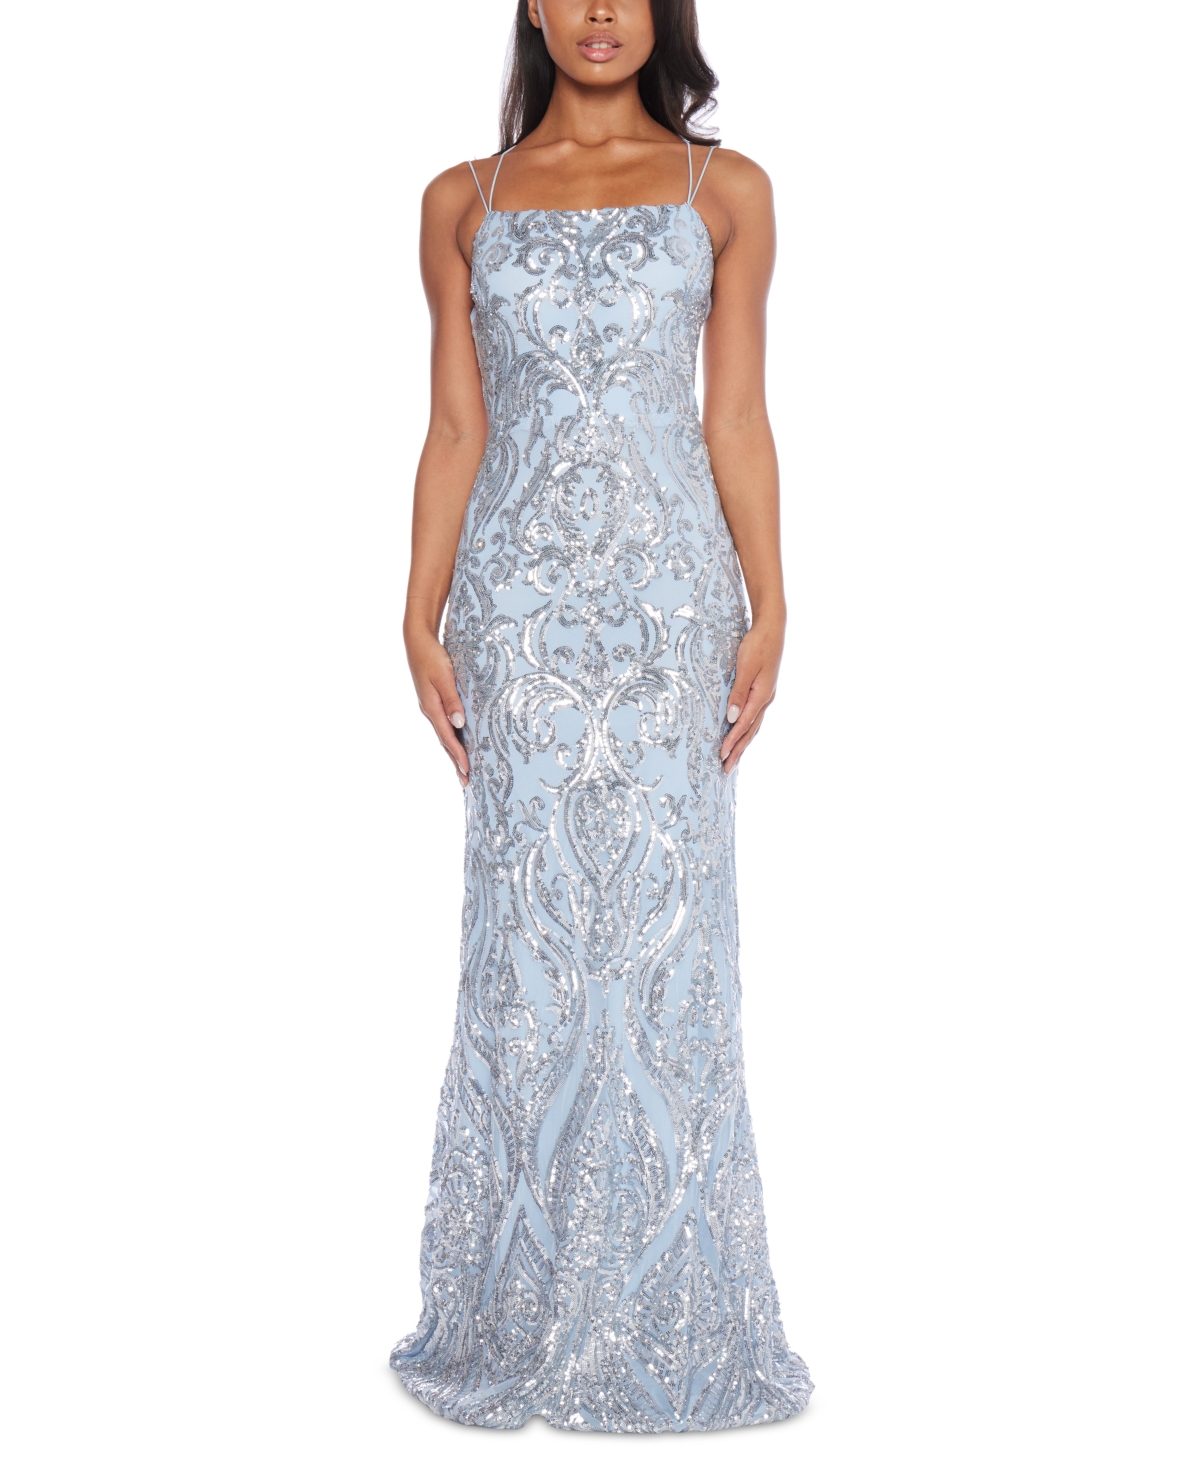 Juniors' Sequined Open-Back Gown - Light Blue, Silver